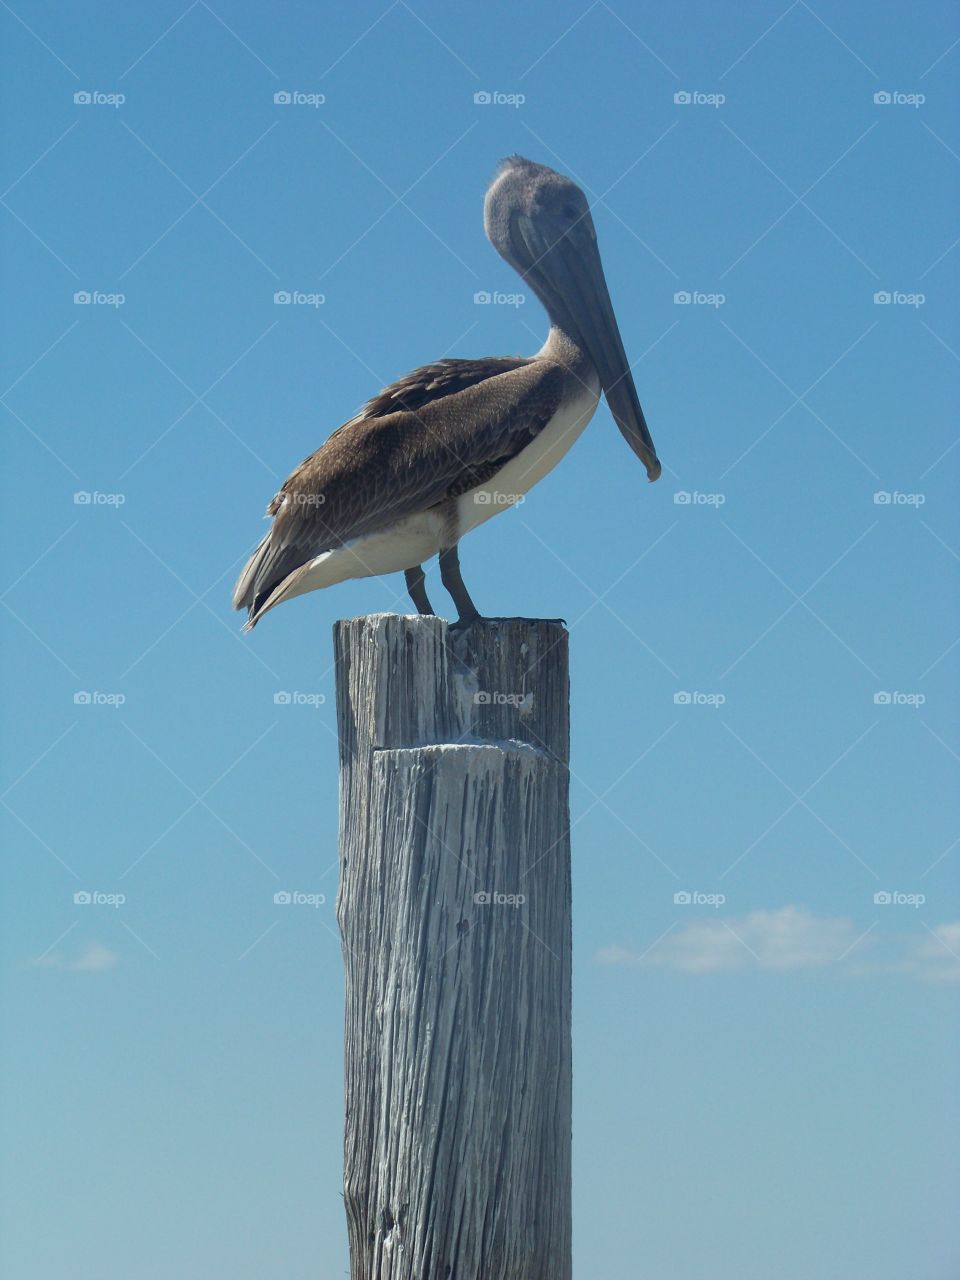 Pelican on piling